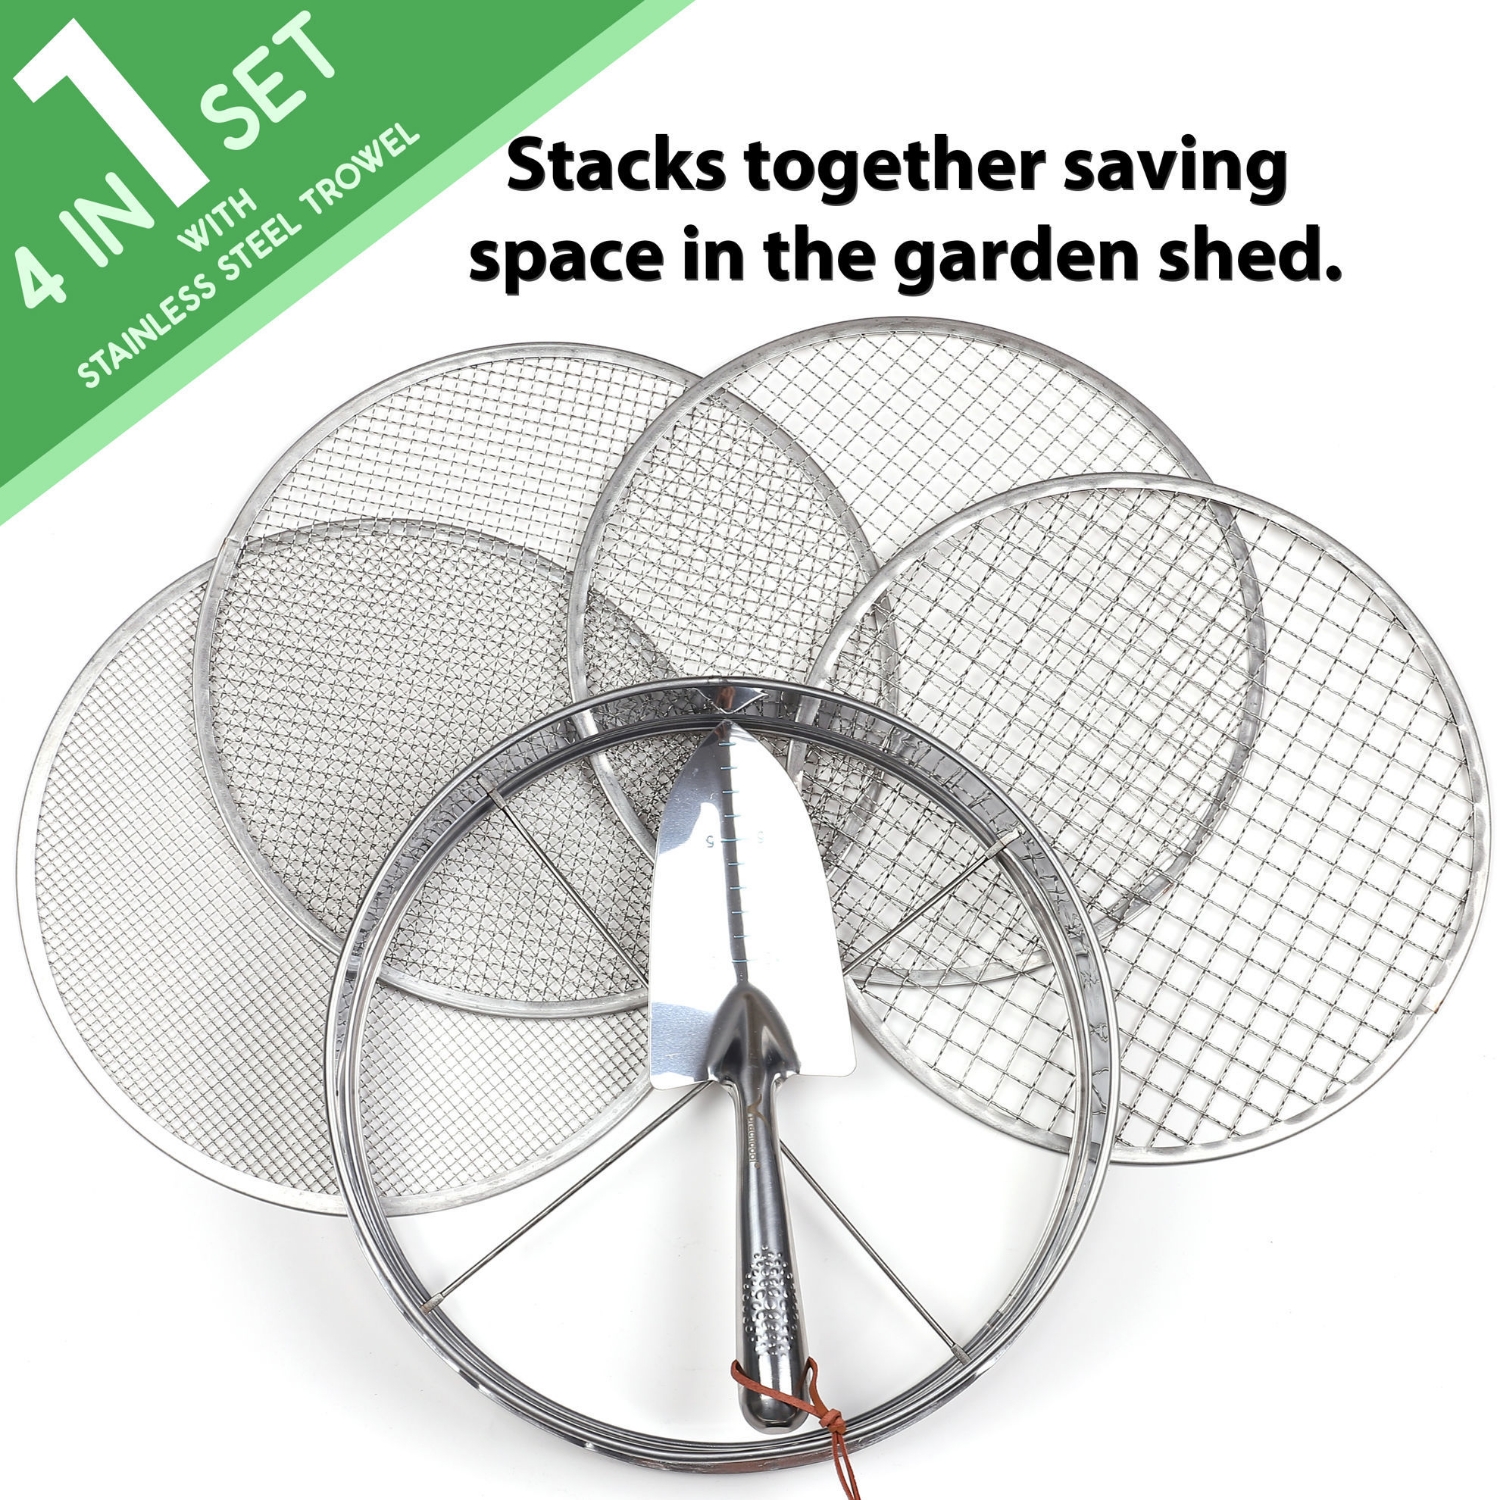 Picture of Practicool Stainless Steel Garden Potting Sieve/Riddle - with 4 interchangeable mesh sizes - 3,6,9,12mm and bonus spade